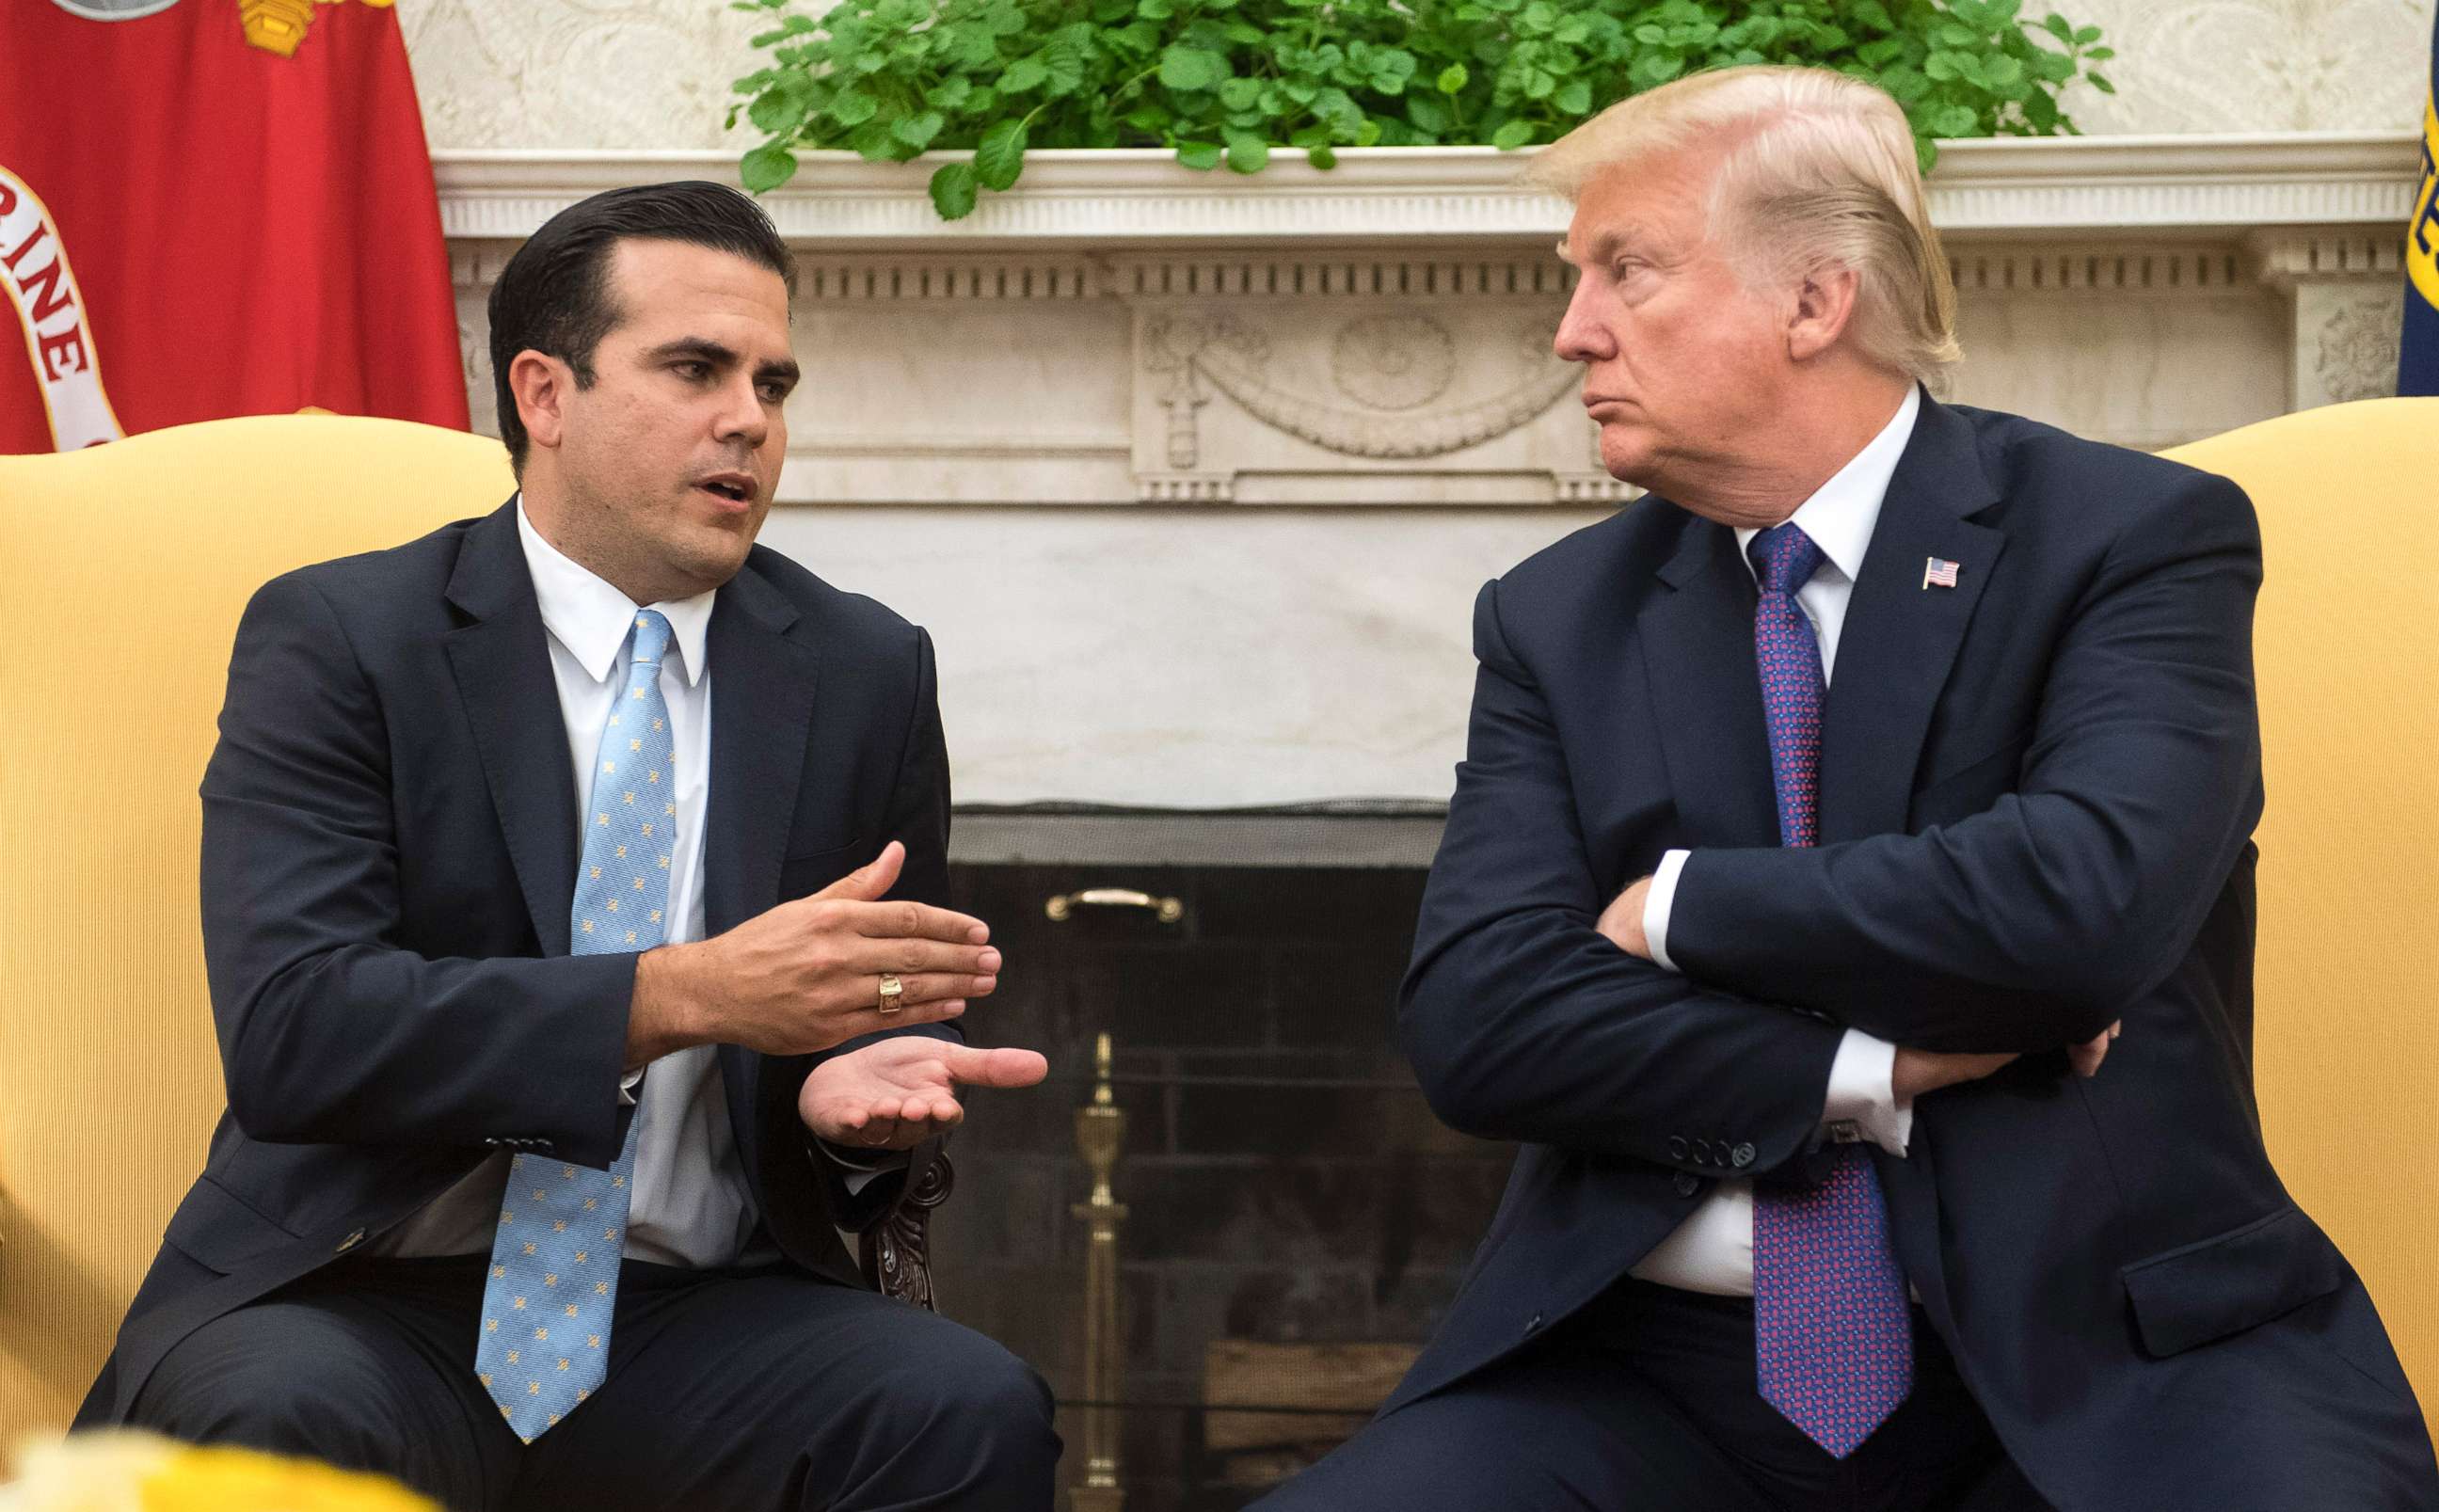 PHOTO: President Donald Trump listens as Governor Ricardo Rossello of Puerto Rico speaks during a meeting in the Oval Office at the White House on Oct. 19, 2017 in Washington, D.C. 